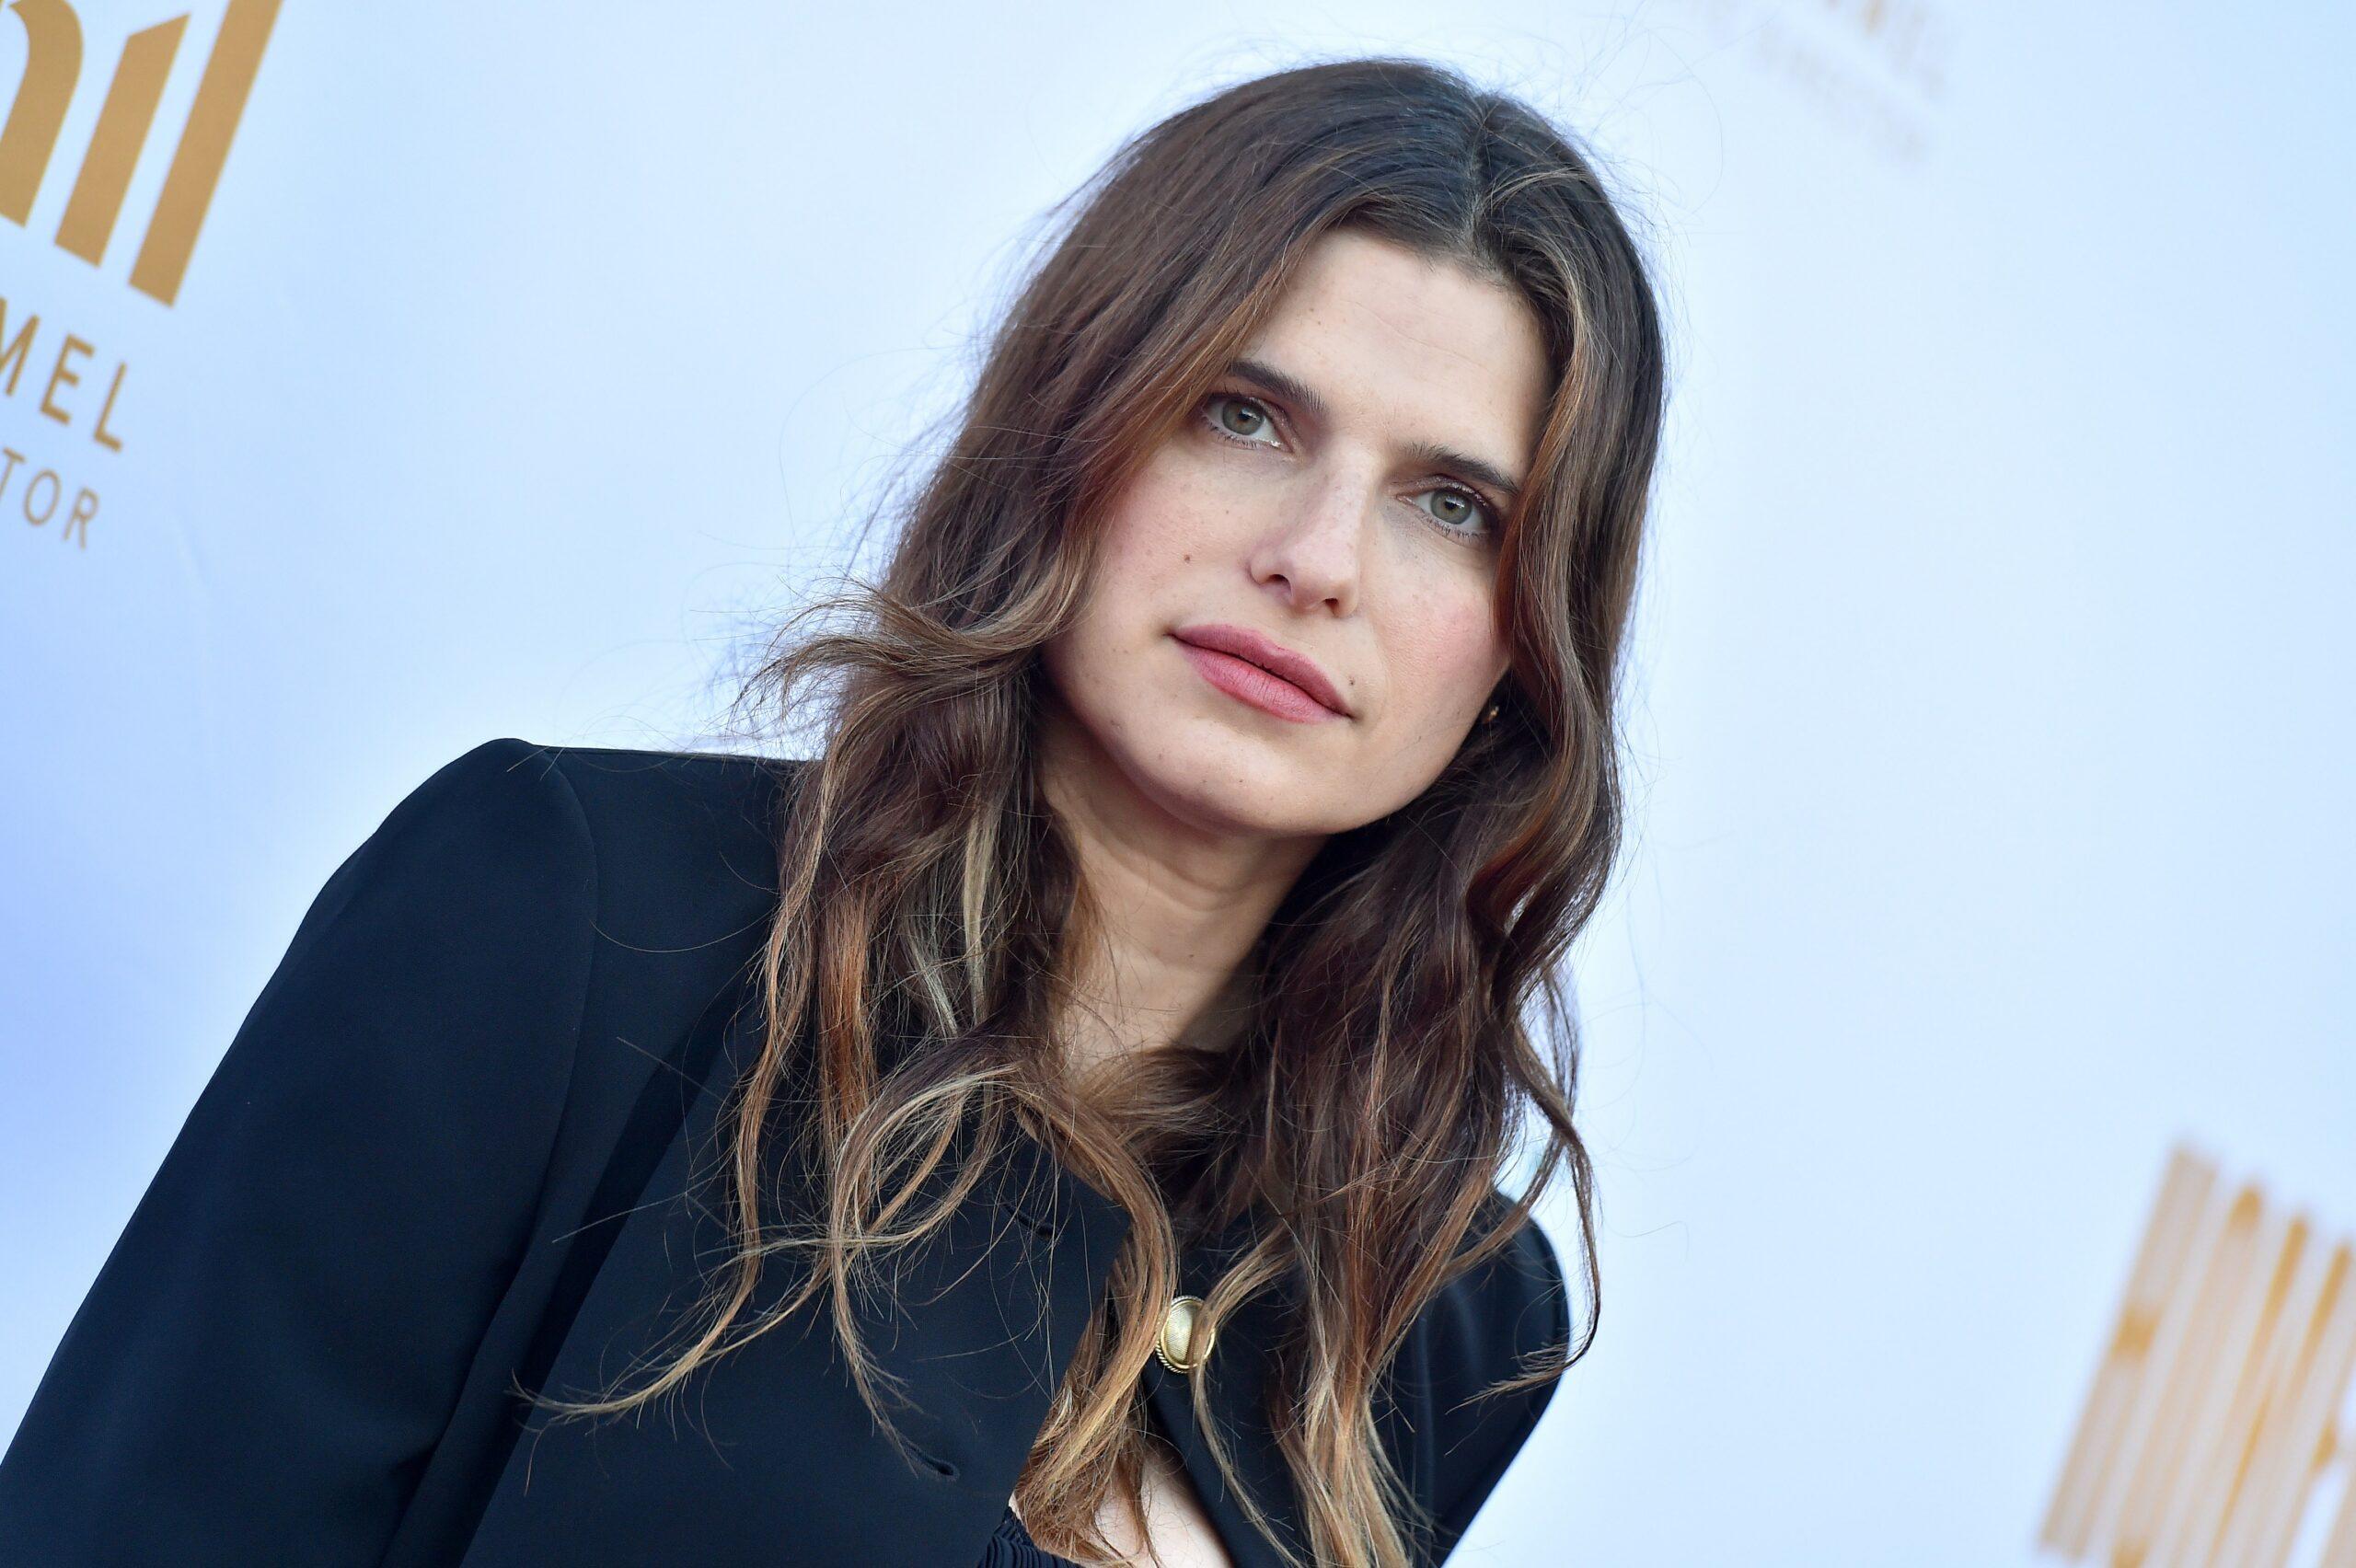 Los Angeles Philharmonic Homecoming Concert & Gala. Walt Disney Concert Hall, Los Angeles, CA. Pictured: Seong-Jin Cho. EVENT October 9, 2021. 09 Oct 2021 Pictured: Lake Bell. 